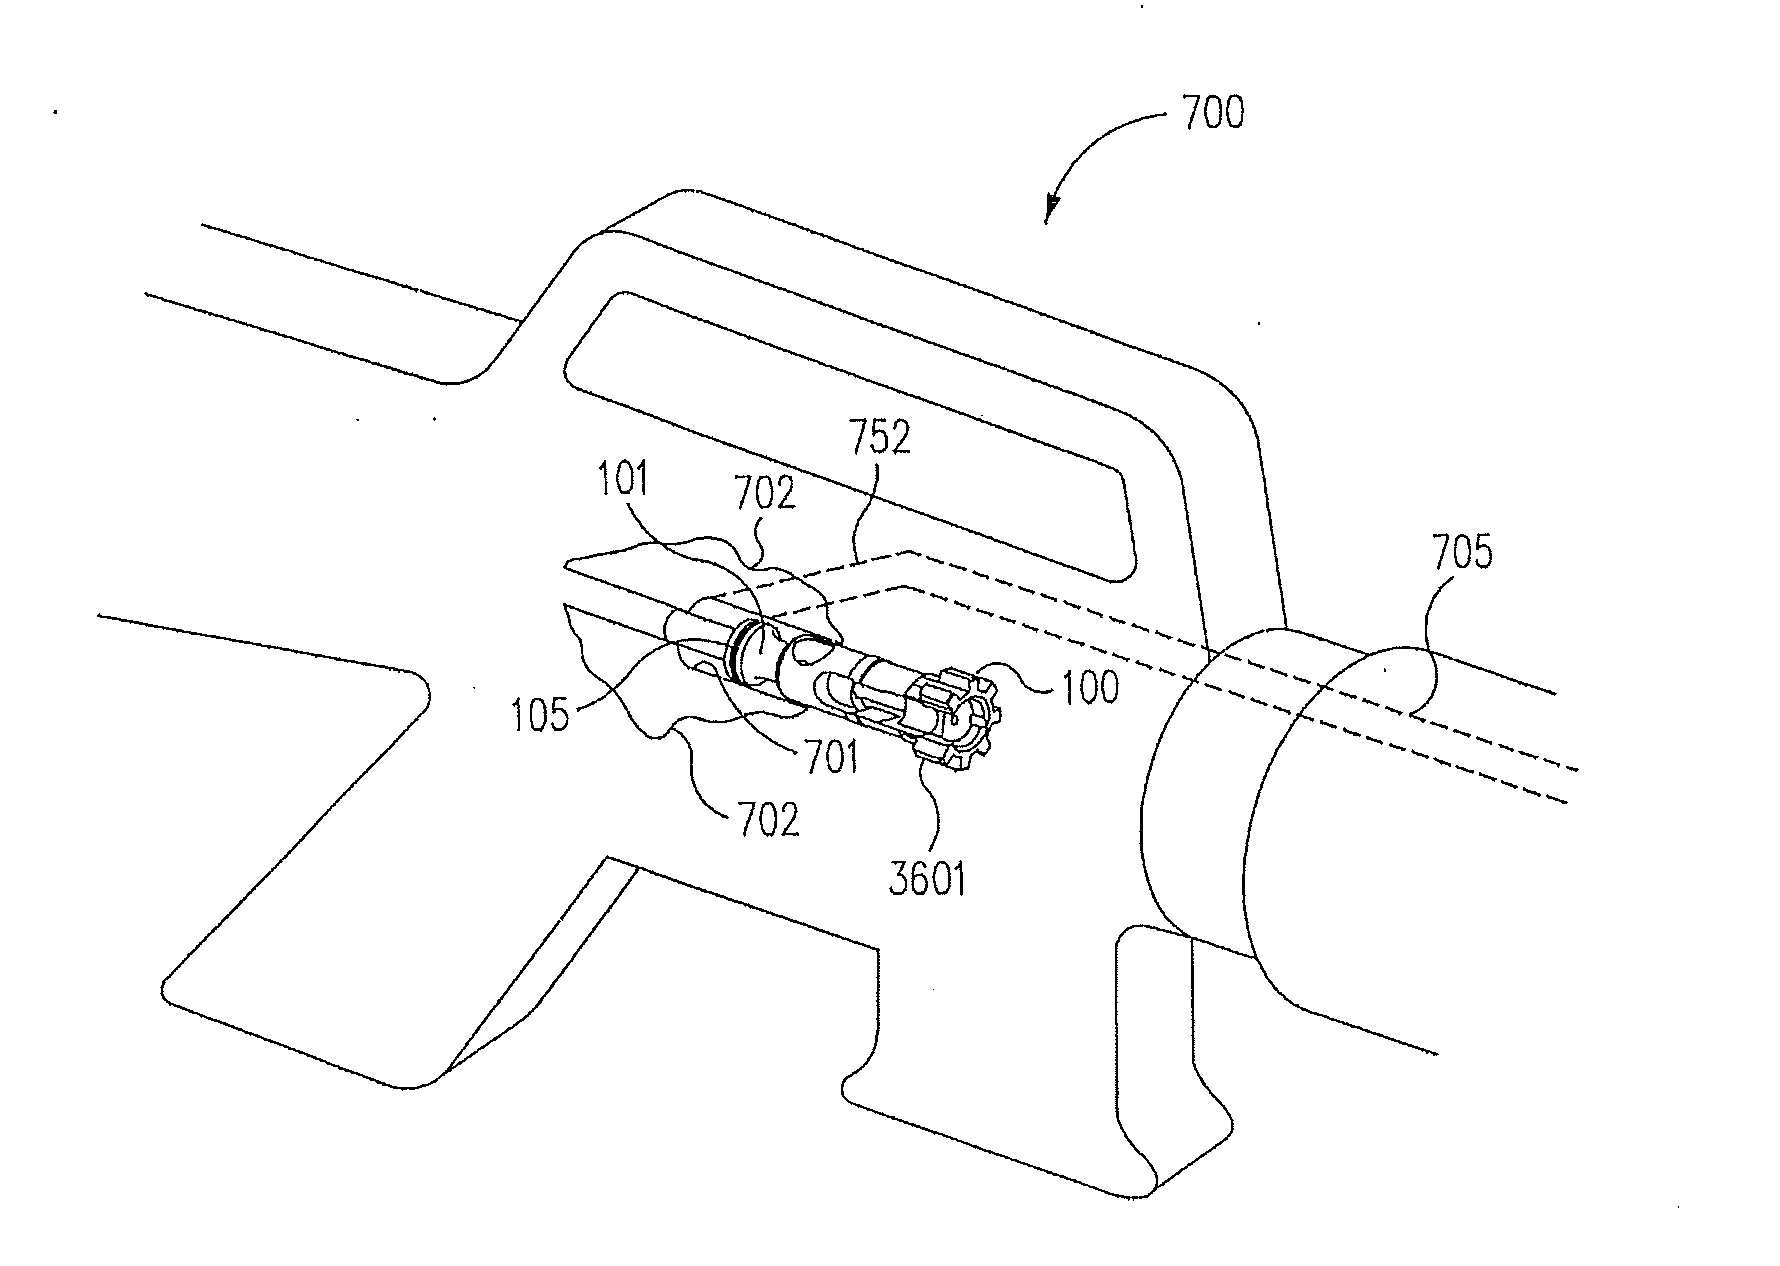 Firearm Systems and Methods